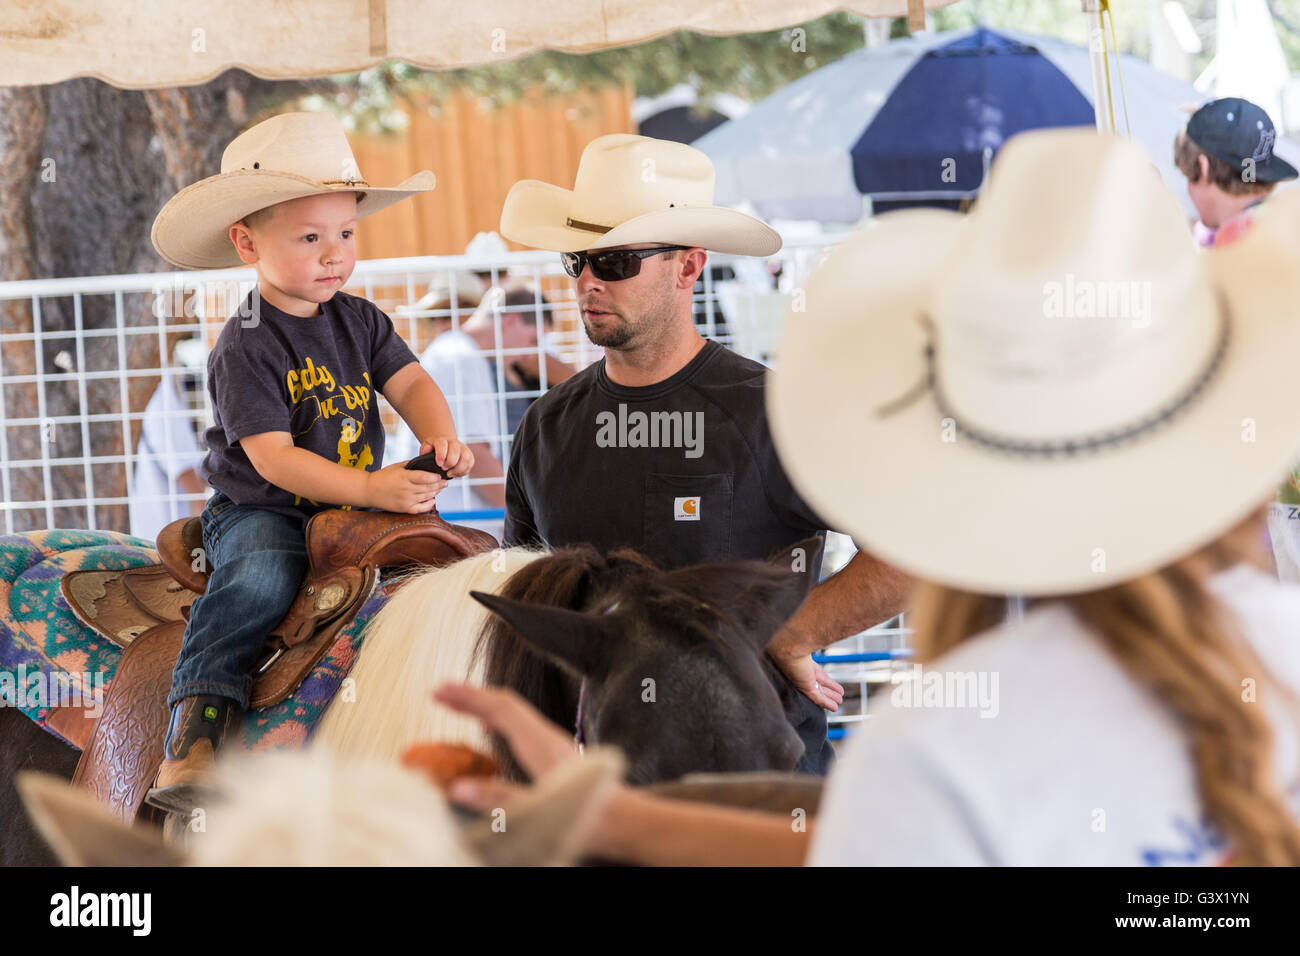 A young boy rides a pony under the watchful eye of his father during Cheyenne Frontier Days July 25, 2015 in Cheyenne, Wyoming. Frontier Days celebrates the cowboy traditions of the west with a rodeo, parade and fair. Stock Photo